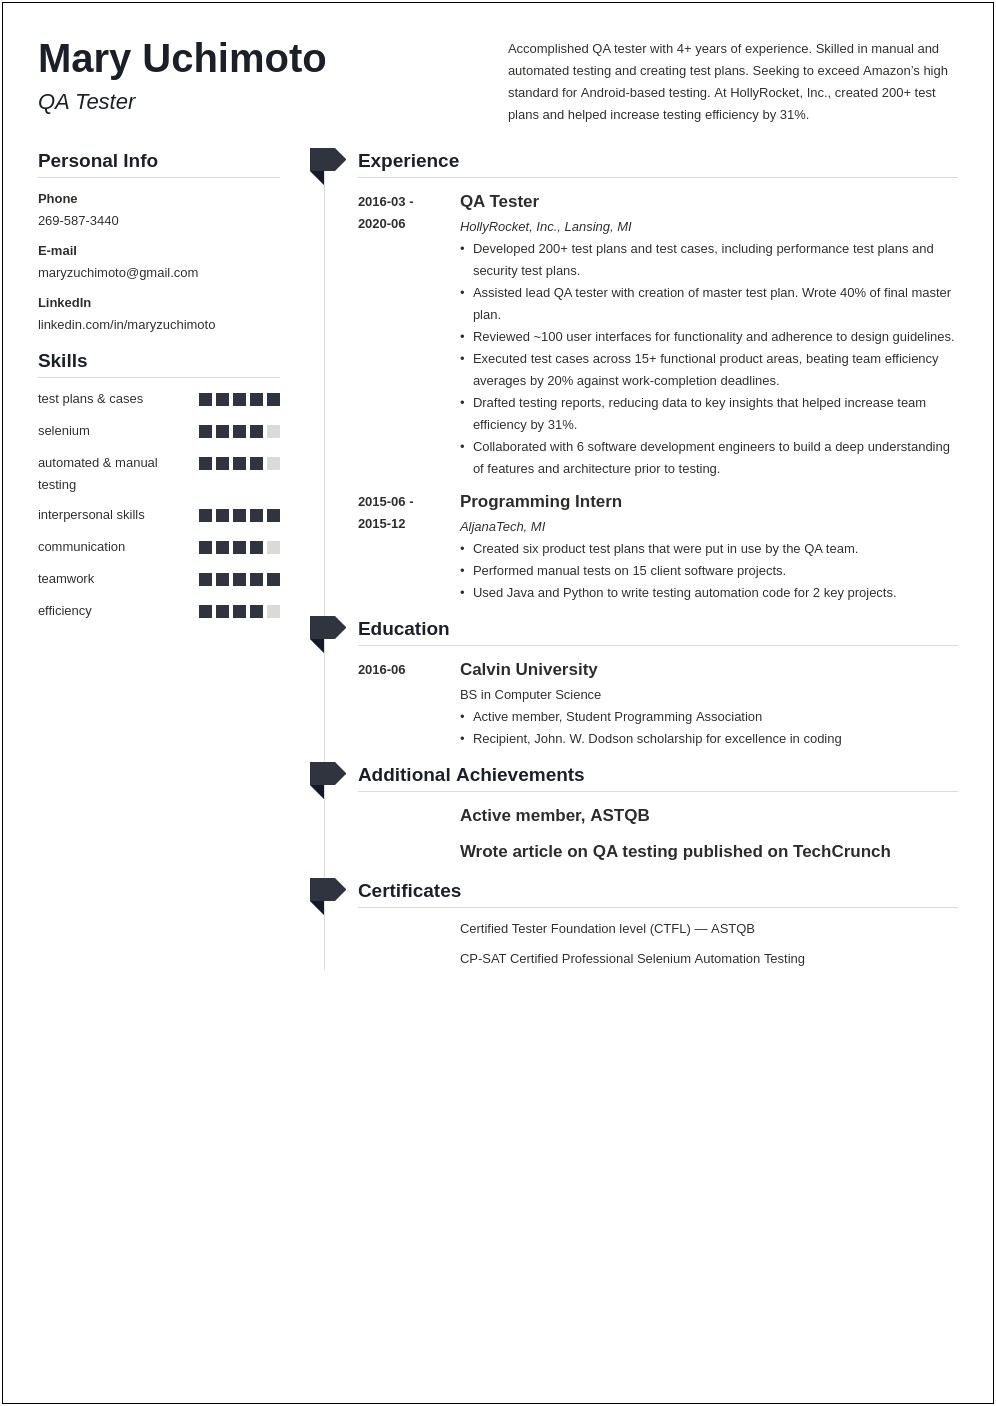 3 Years Experience Resume In Performance Testing